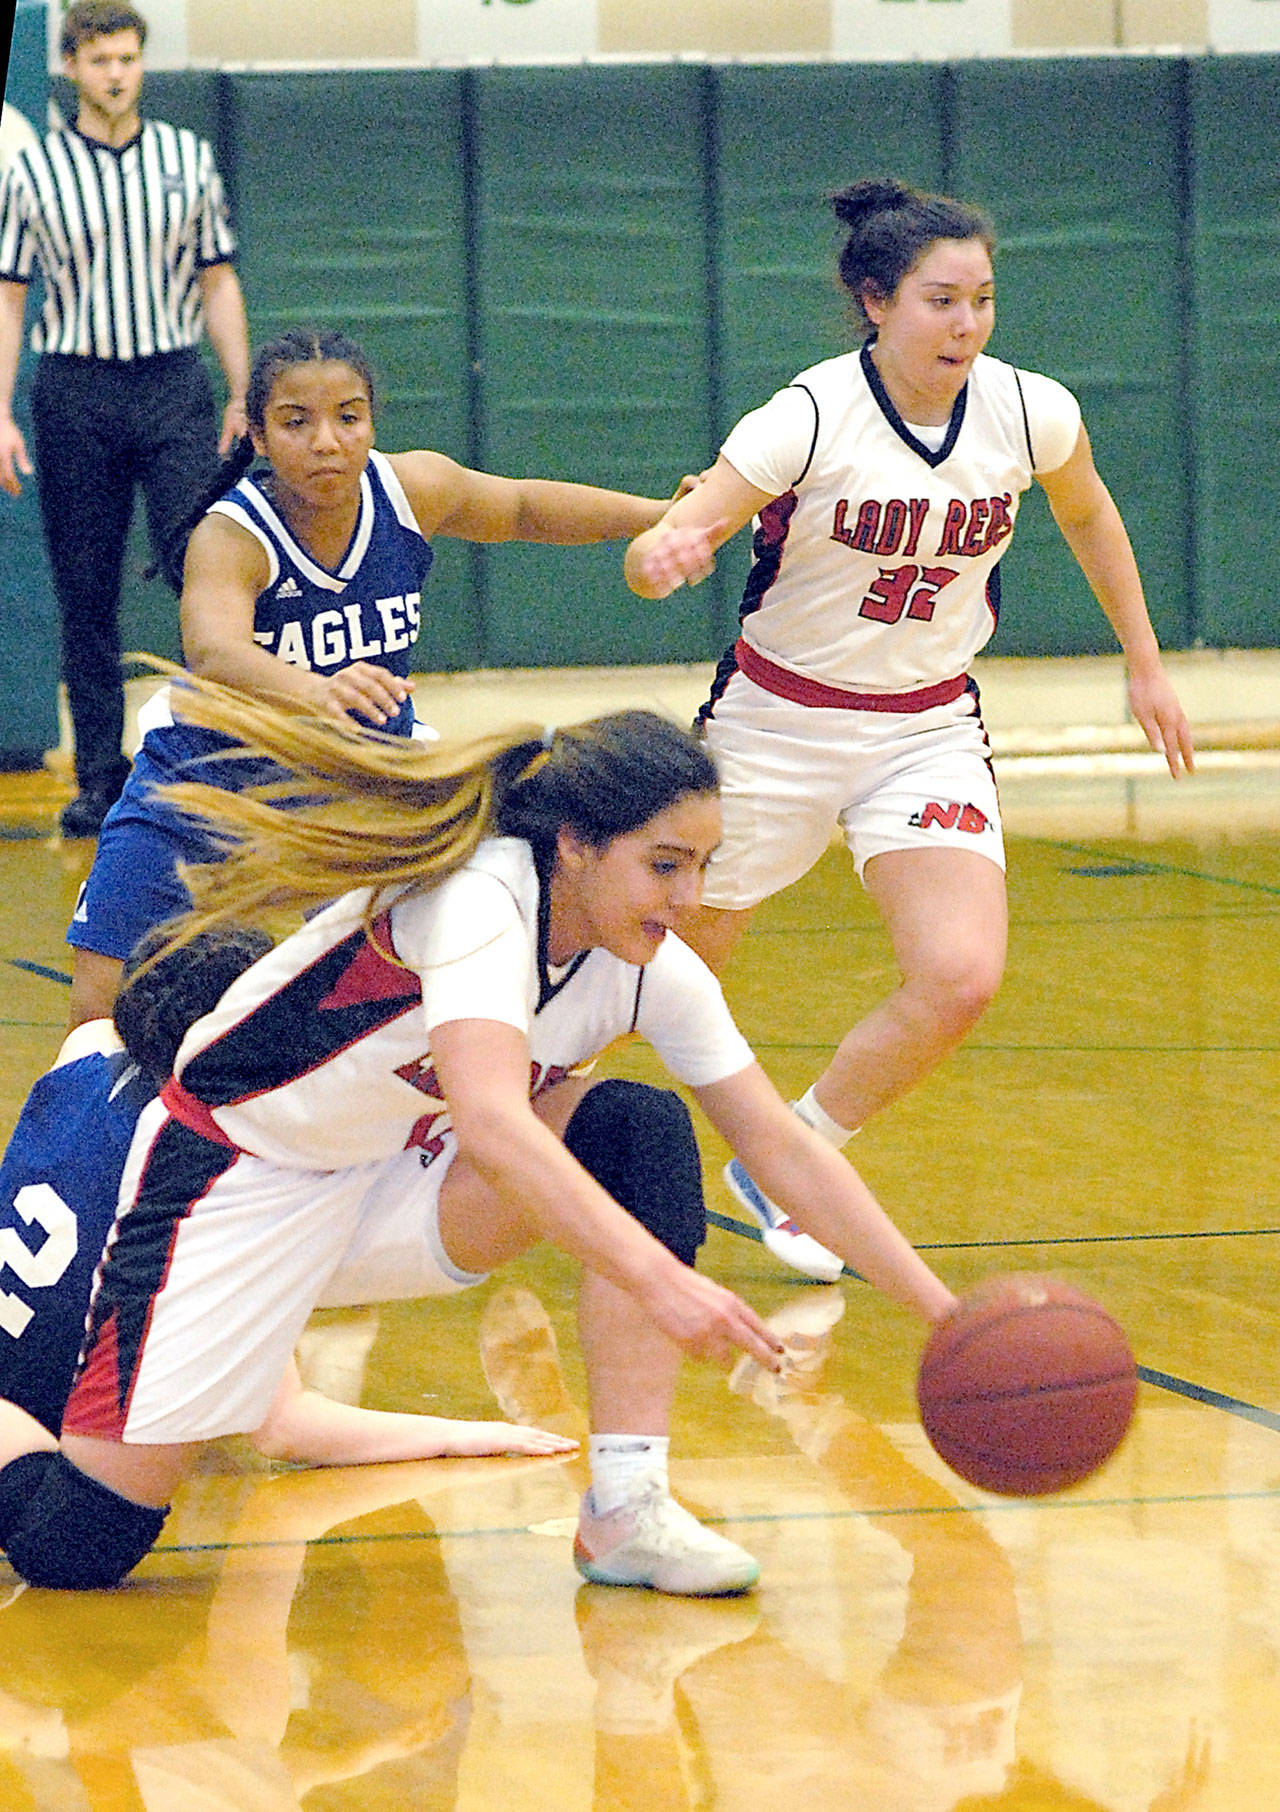 Keith Thorpe/Peninsula Daily News Neah Bay’s Courtney Swan, center, dives for the ball after tipping it from the grasp of Grace Academy’s Sabrina Metcalf, on floor, as Grace Academy’s Emily Fredrickson and Neah’ Bay’s Ruth Moss, right, chase from behind on Friday at Port Angeles High School.